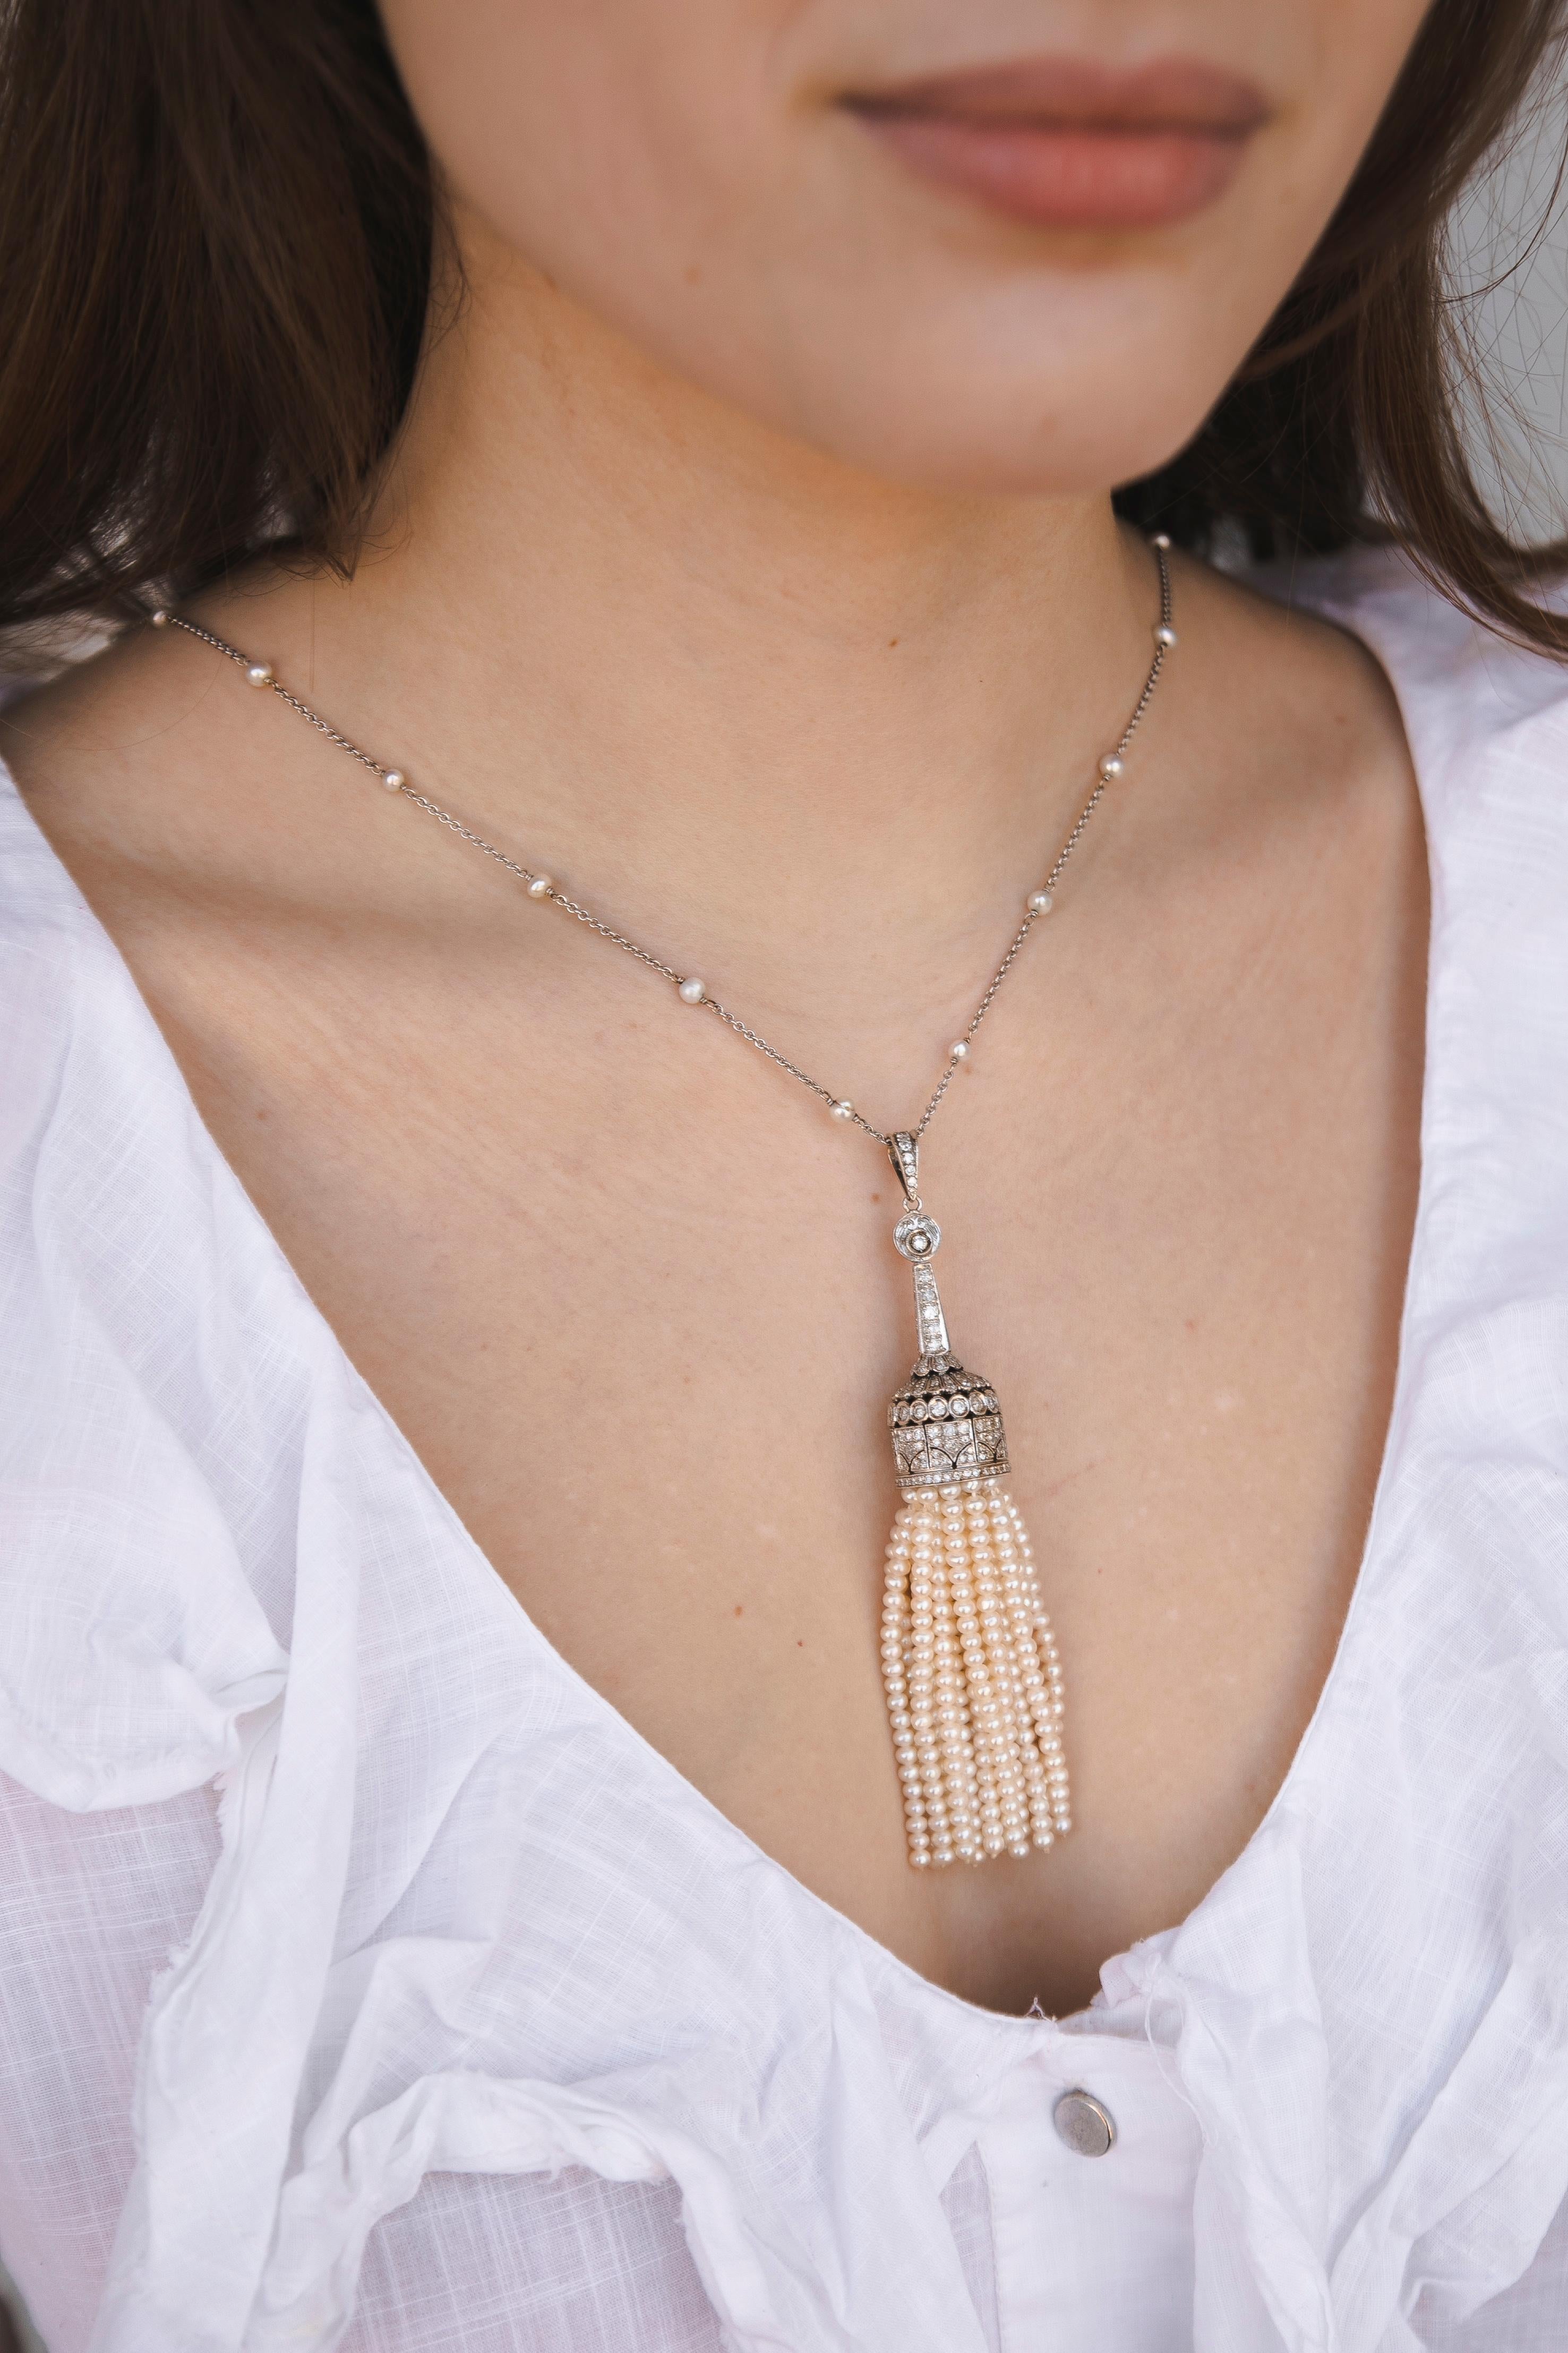 Pearls and Diamond Art Deco Tassel Necklace White Gold 18K. Really long and stylish chain is composed of alternating nature Pearls. The base of the tassel is covered with Diamonds on all sides. The work of the jeweler is just outstanding. 
The fine